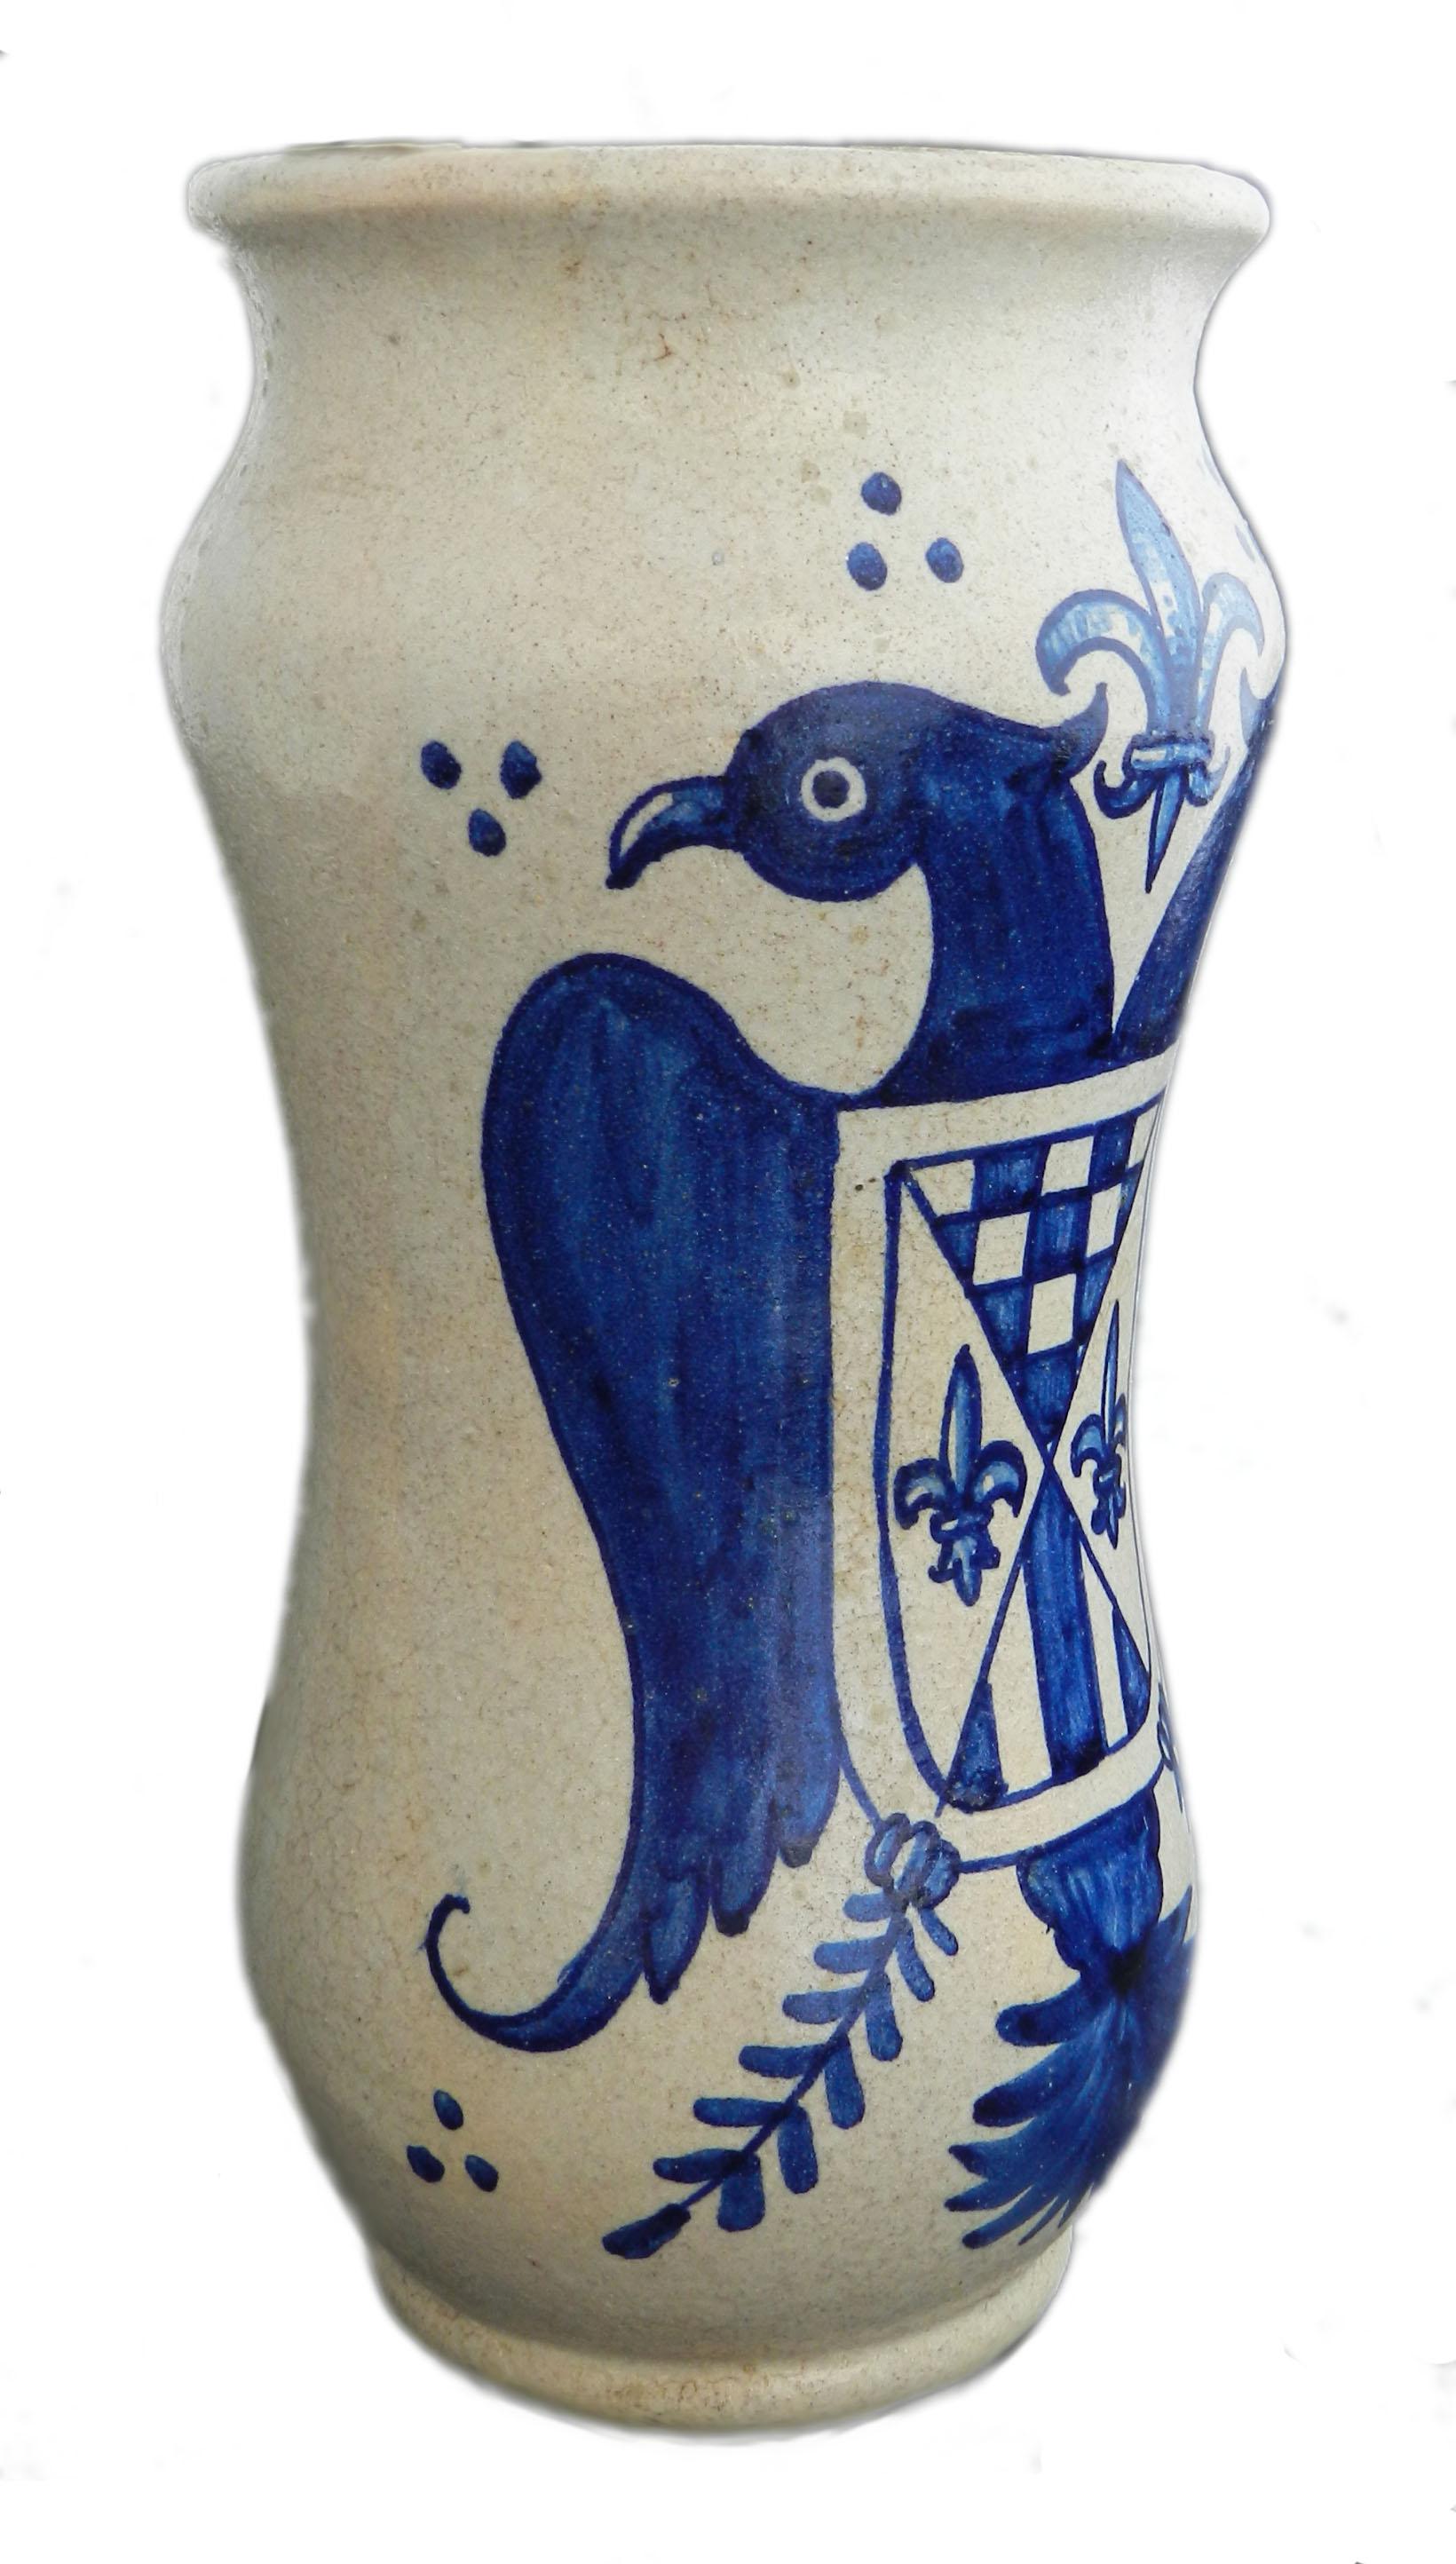 19th century Albarello Jar 
Double Eagle design
Albarello or Pharmacy Jar  
An albarello is a type of maiolica earthenware jar, originally a medicinal jar designed to hold apothecaries' ointments and dry drugs. The development of this type of